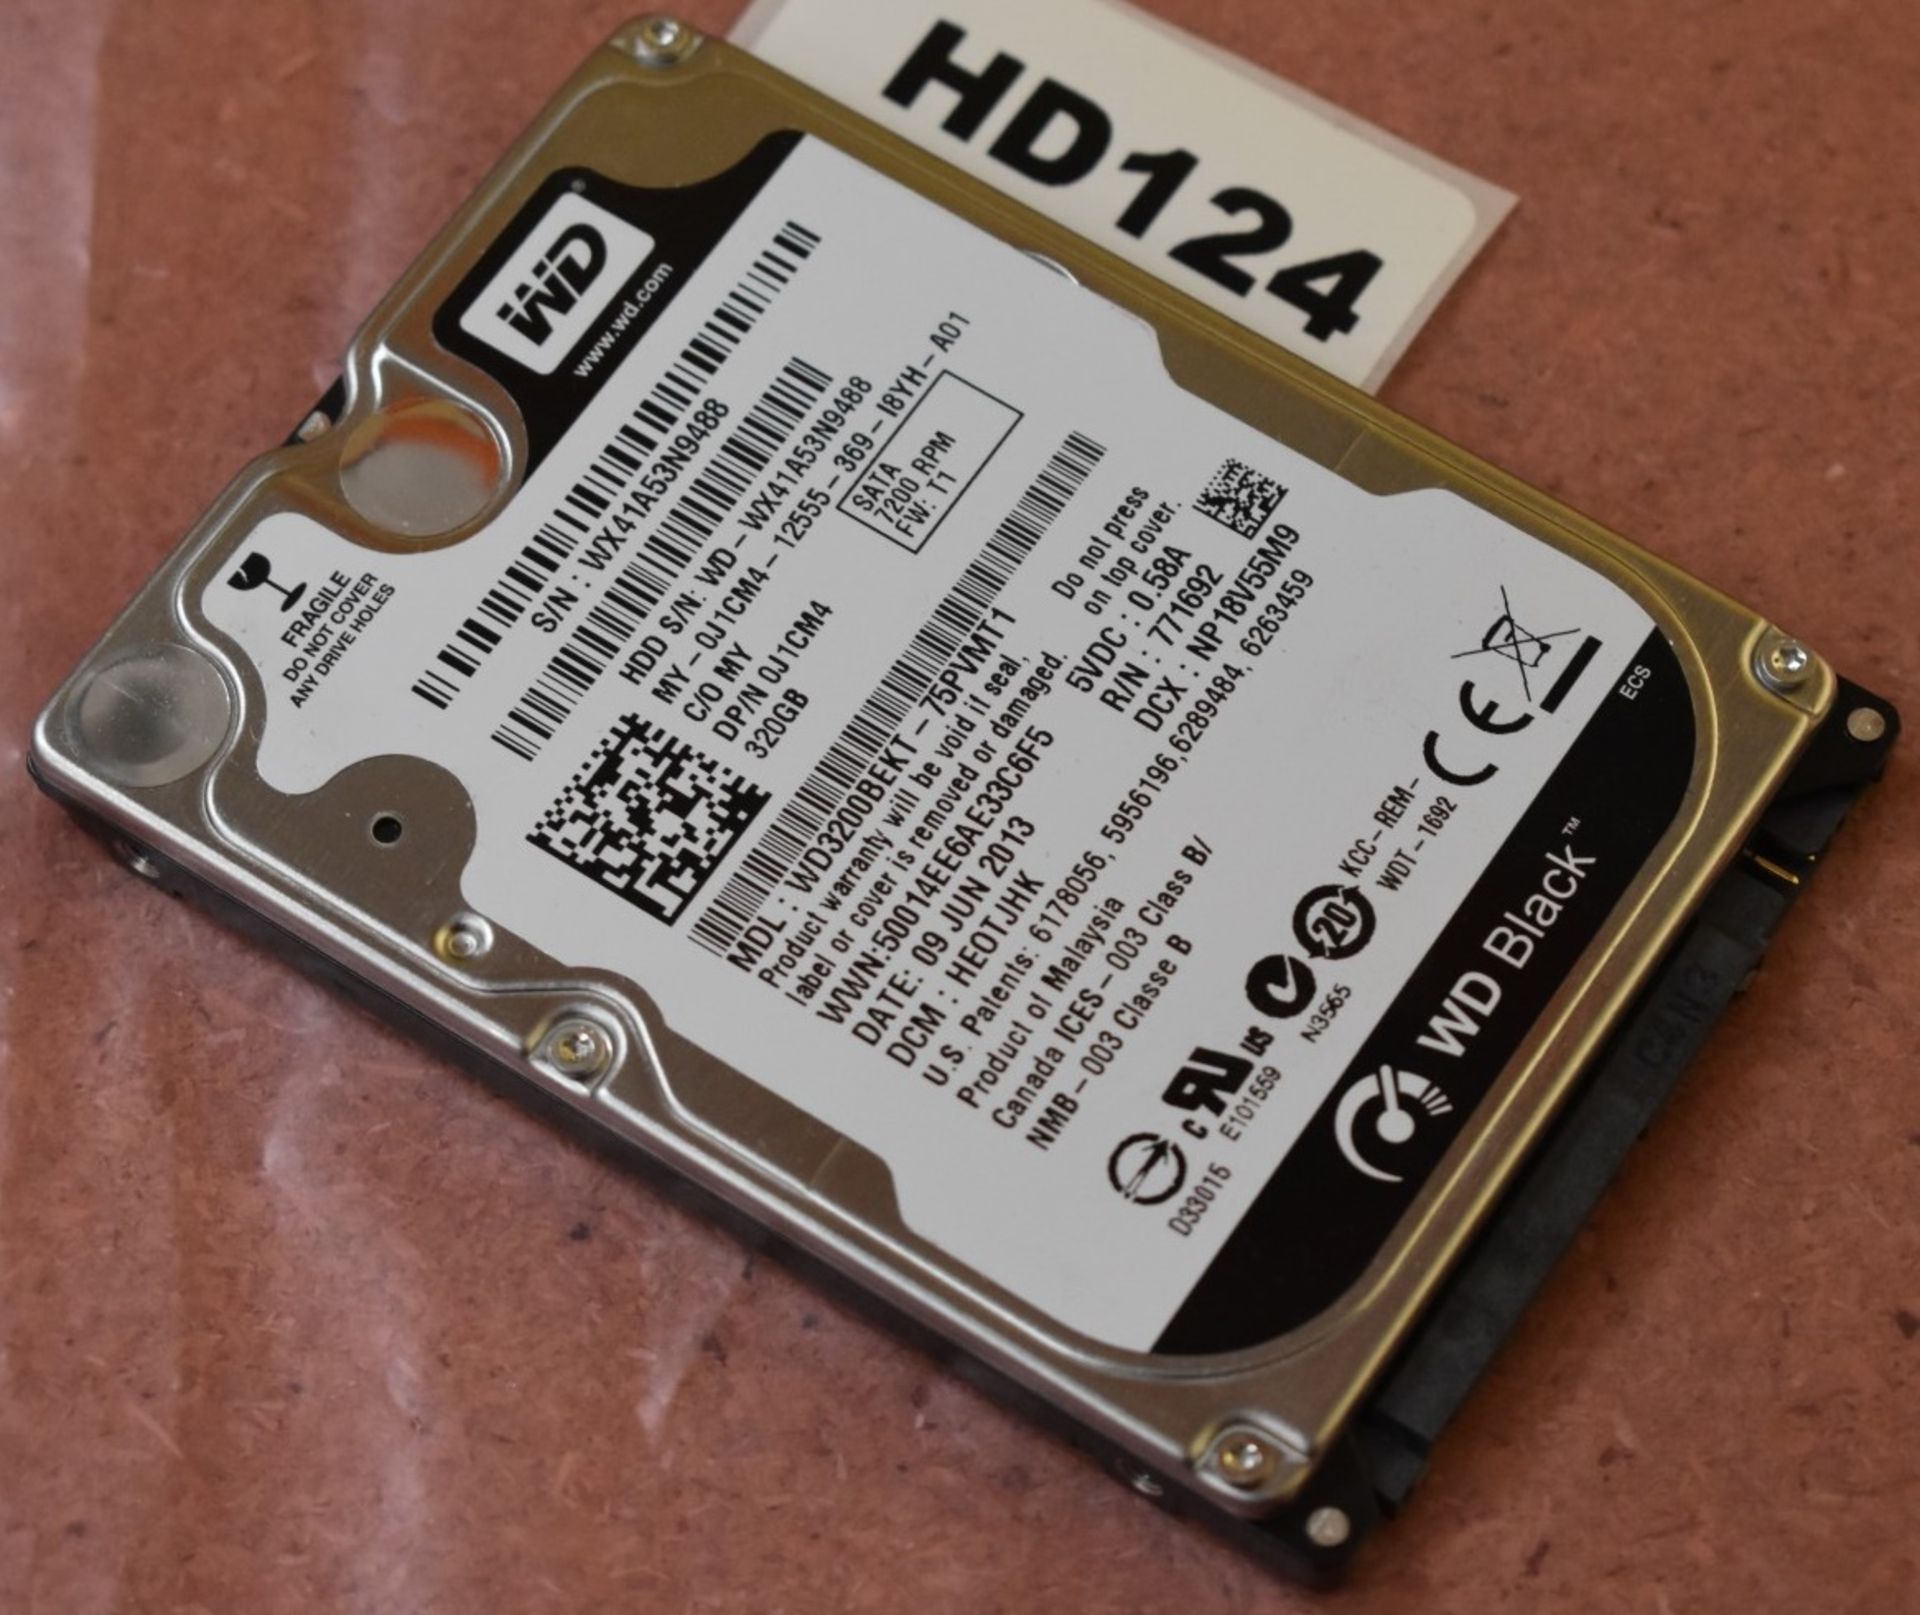 4 x Western Digital 320gb Black 2.5 Inch SATA Hard Drives - Tested and Formatted - HD113/114/118/124 - Image 4 of 4